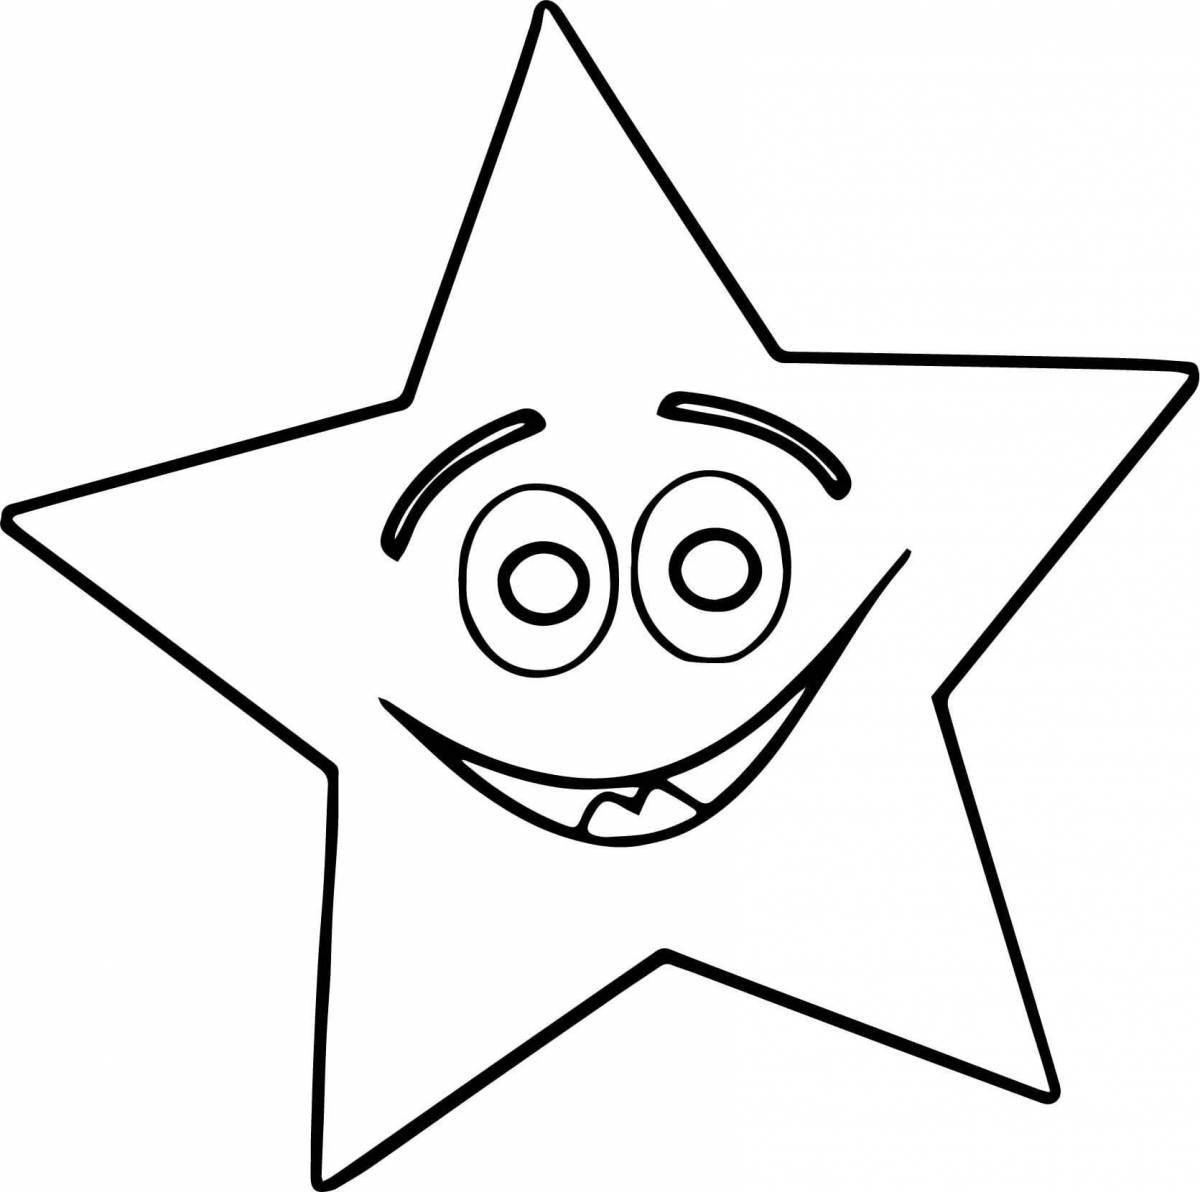 Bright coloring star pattern